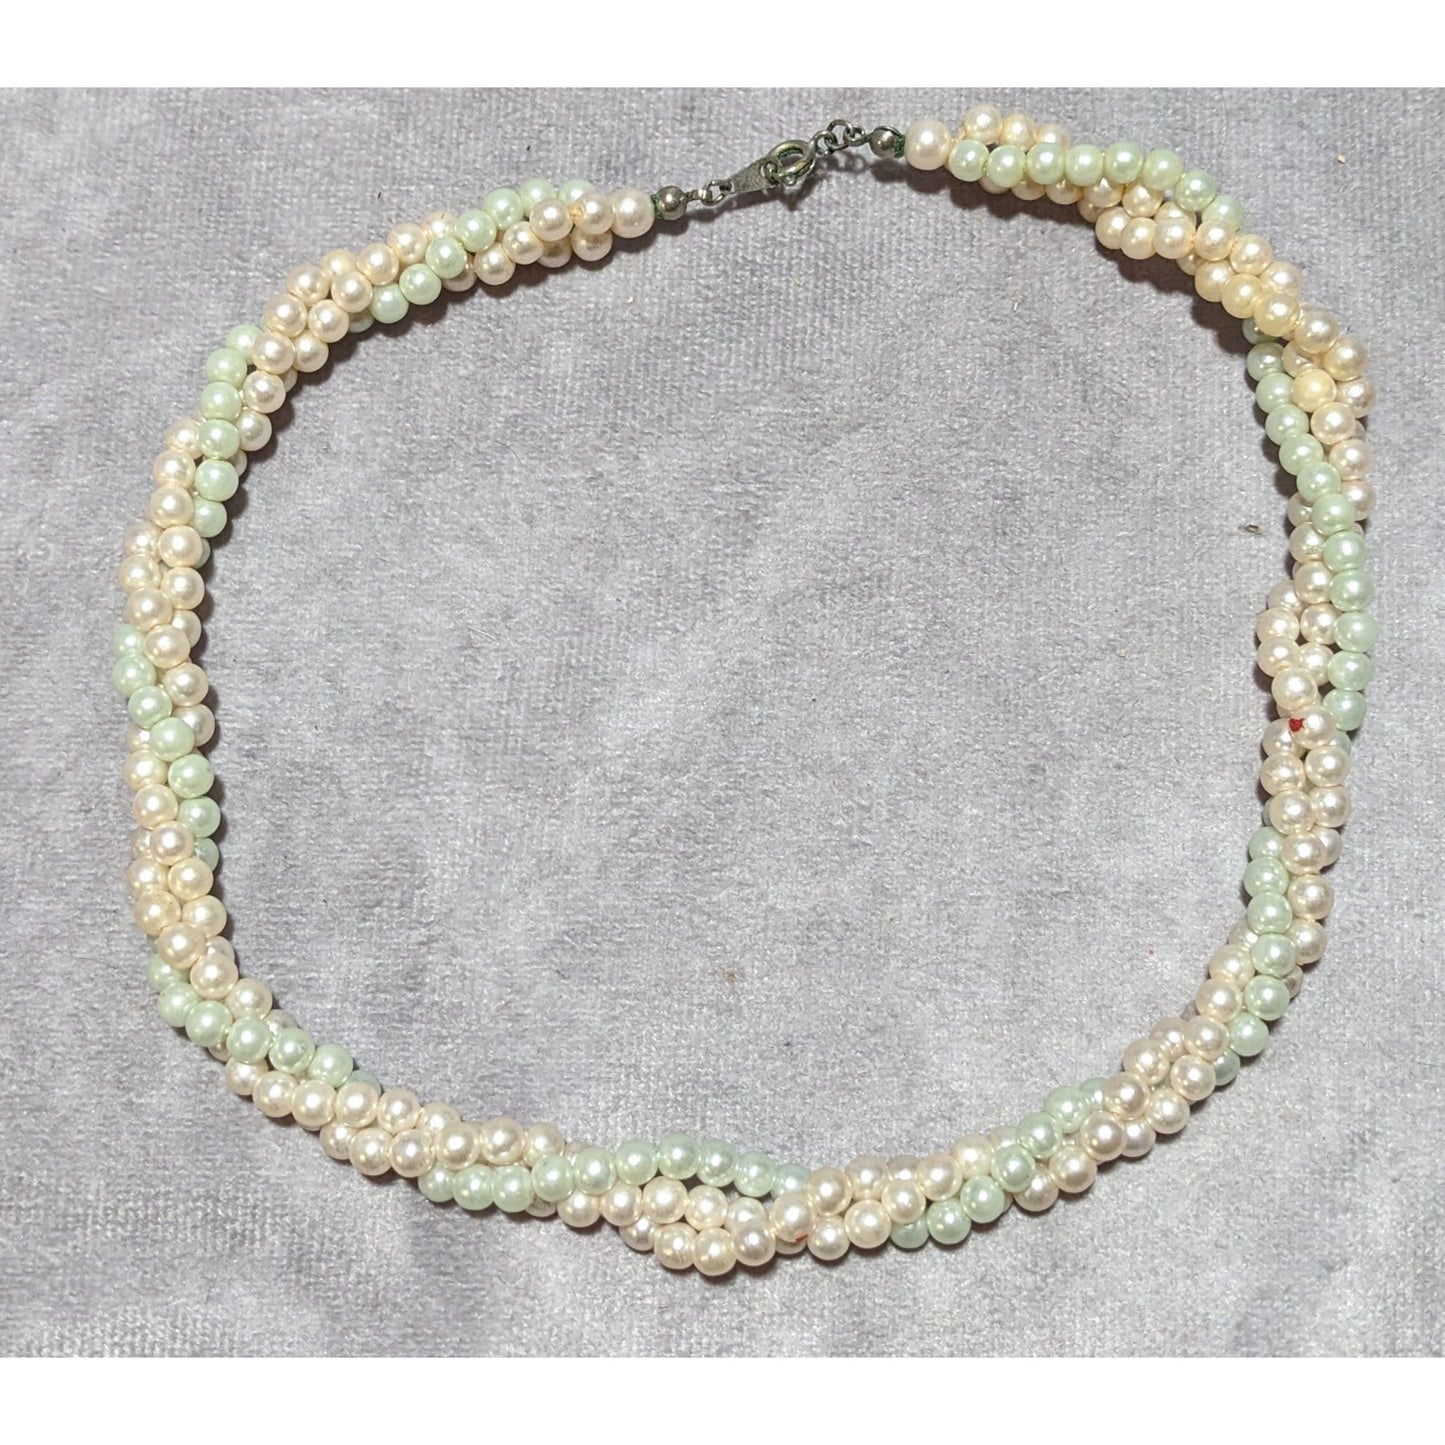 Twisted Pastel Pearl Necklace